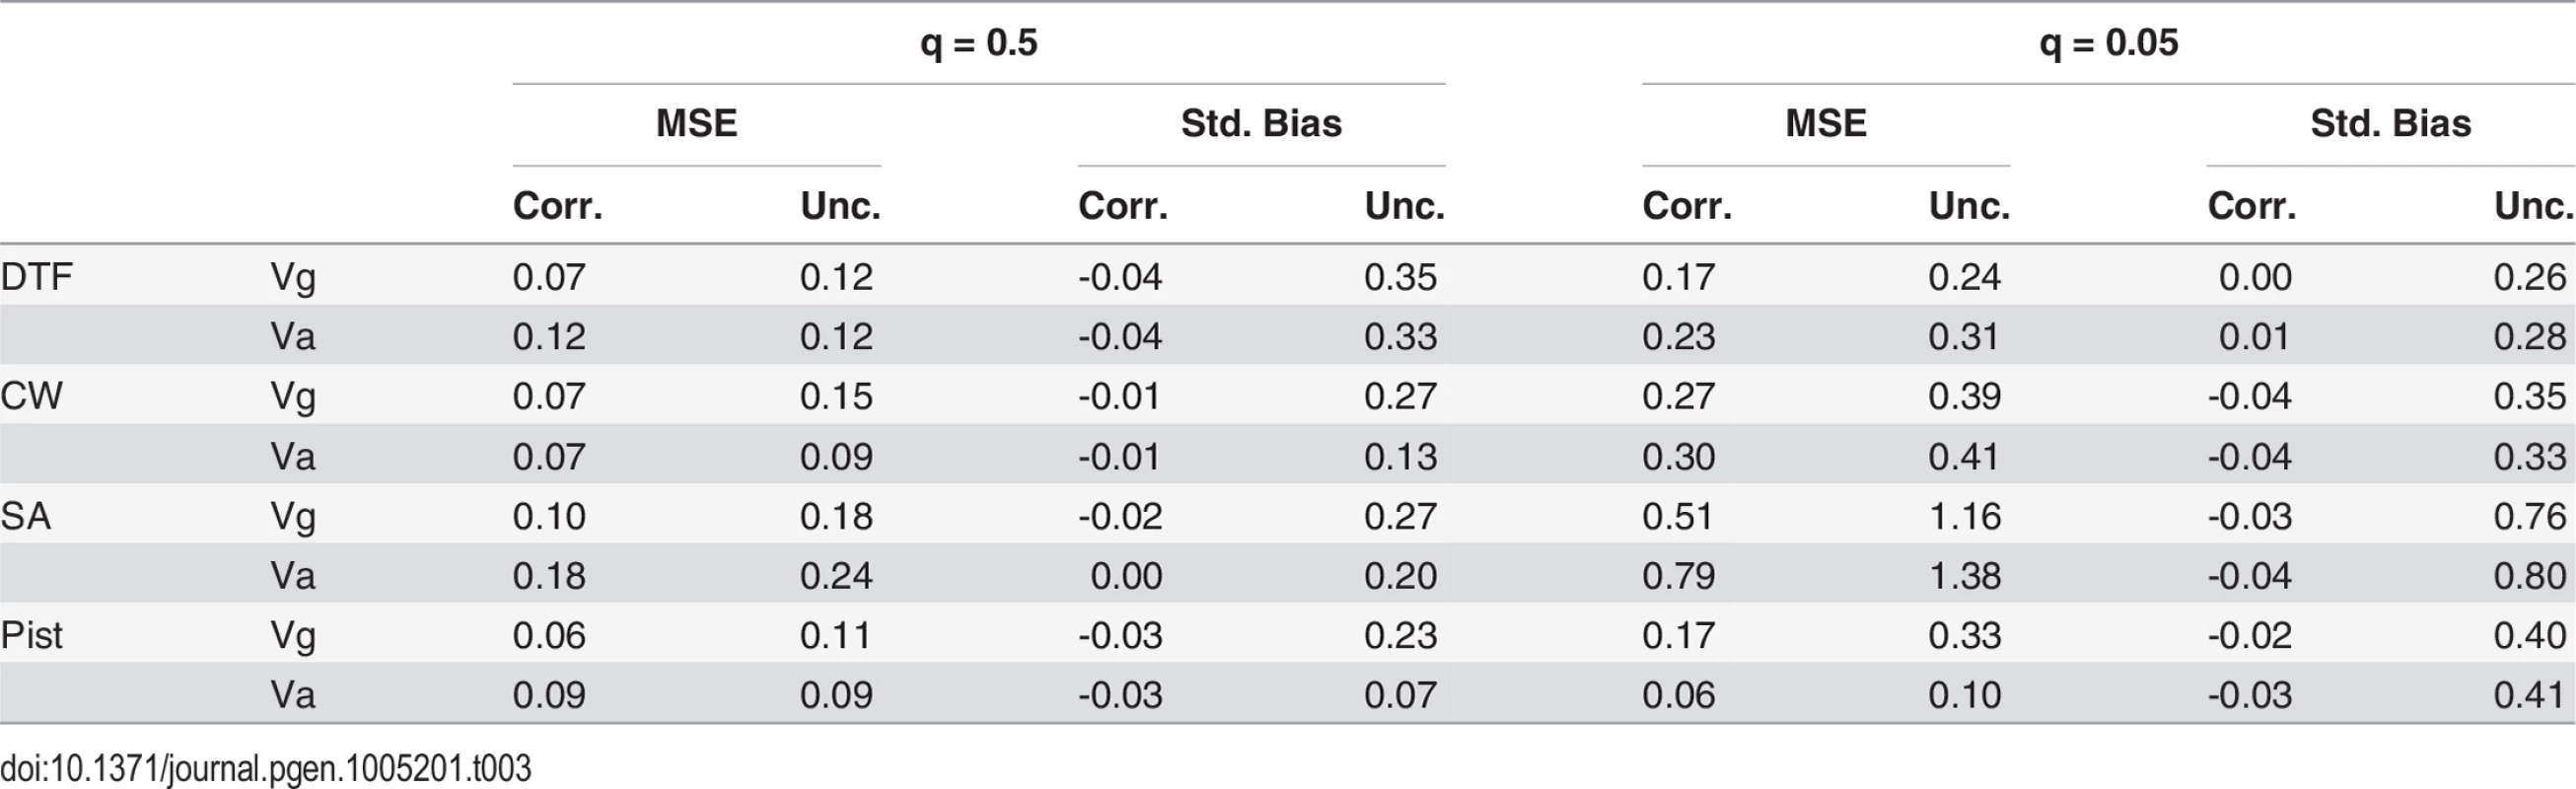 Standardized mean square error (MSE) and standardized bias for corrected (Corr.) and uncorrected (Unc.) variance estimates from the bias-correction simulations.